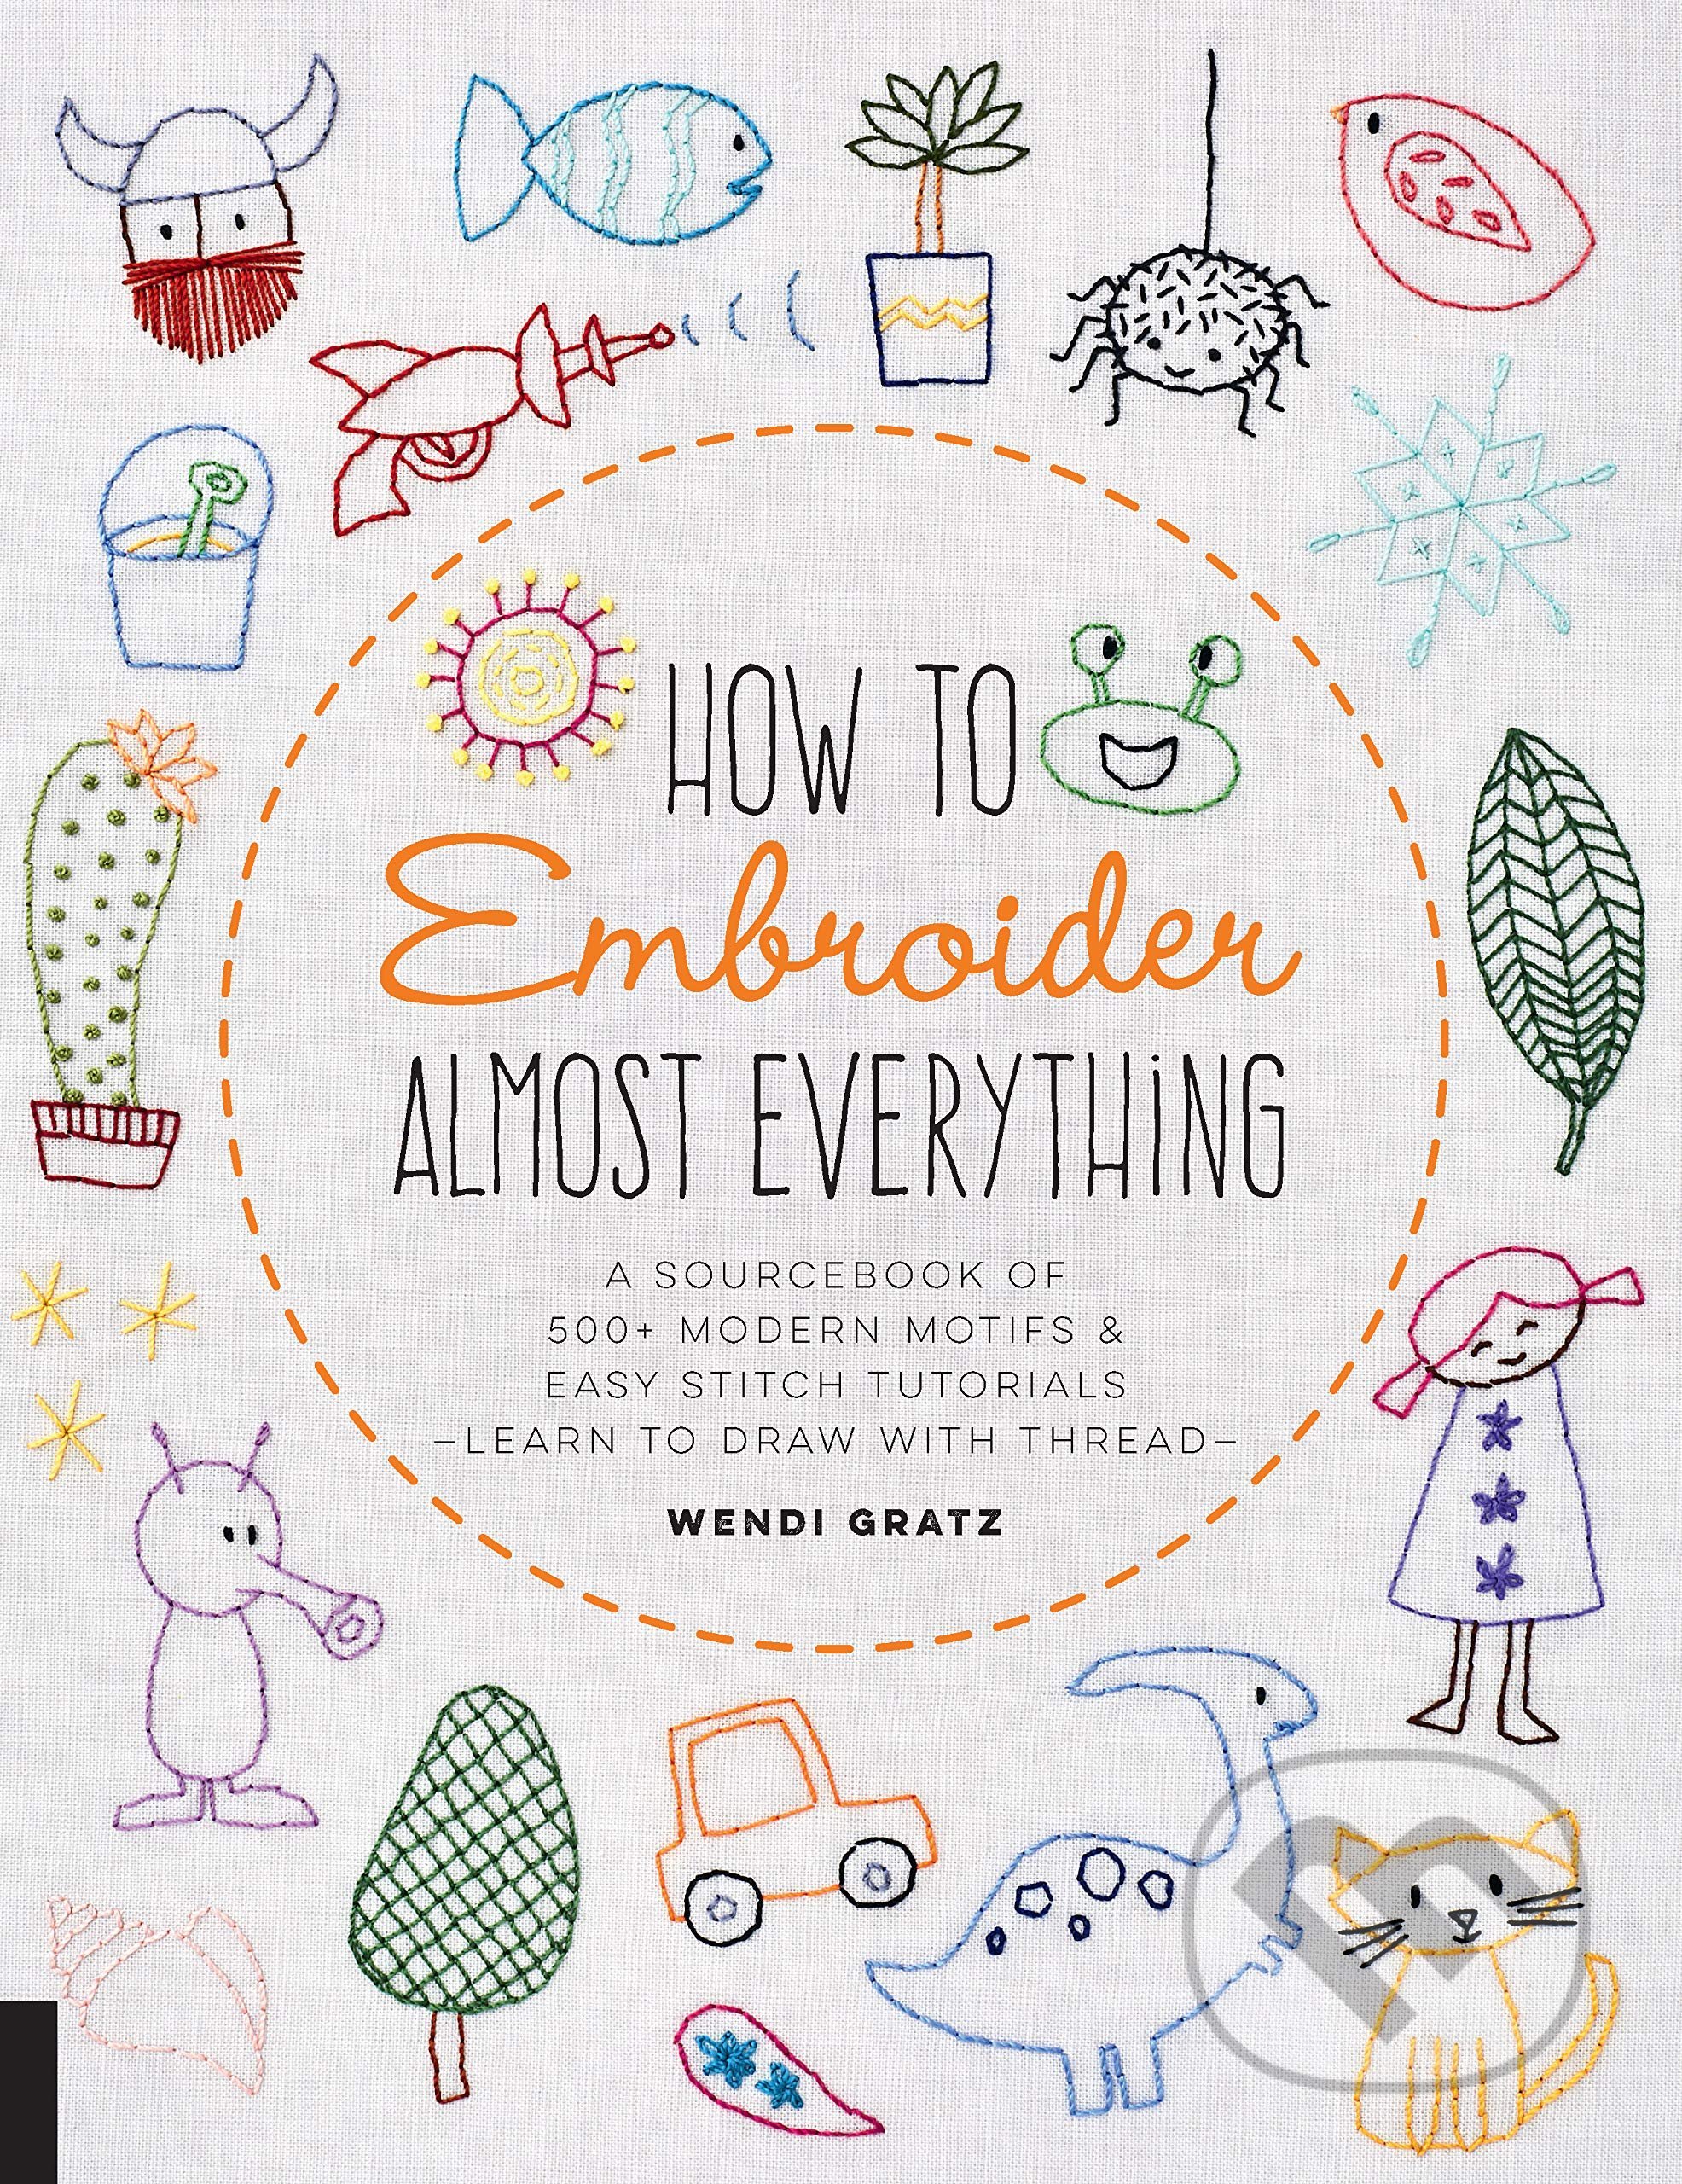 How to Embroider Almost Everything - Wendi Gratz, Quarry, 2019